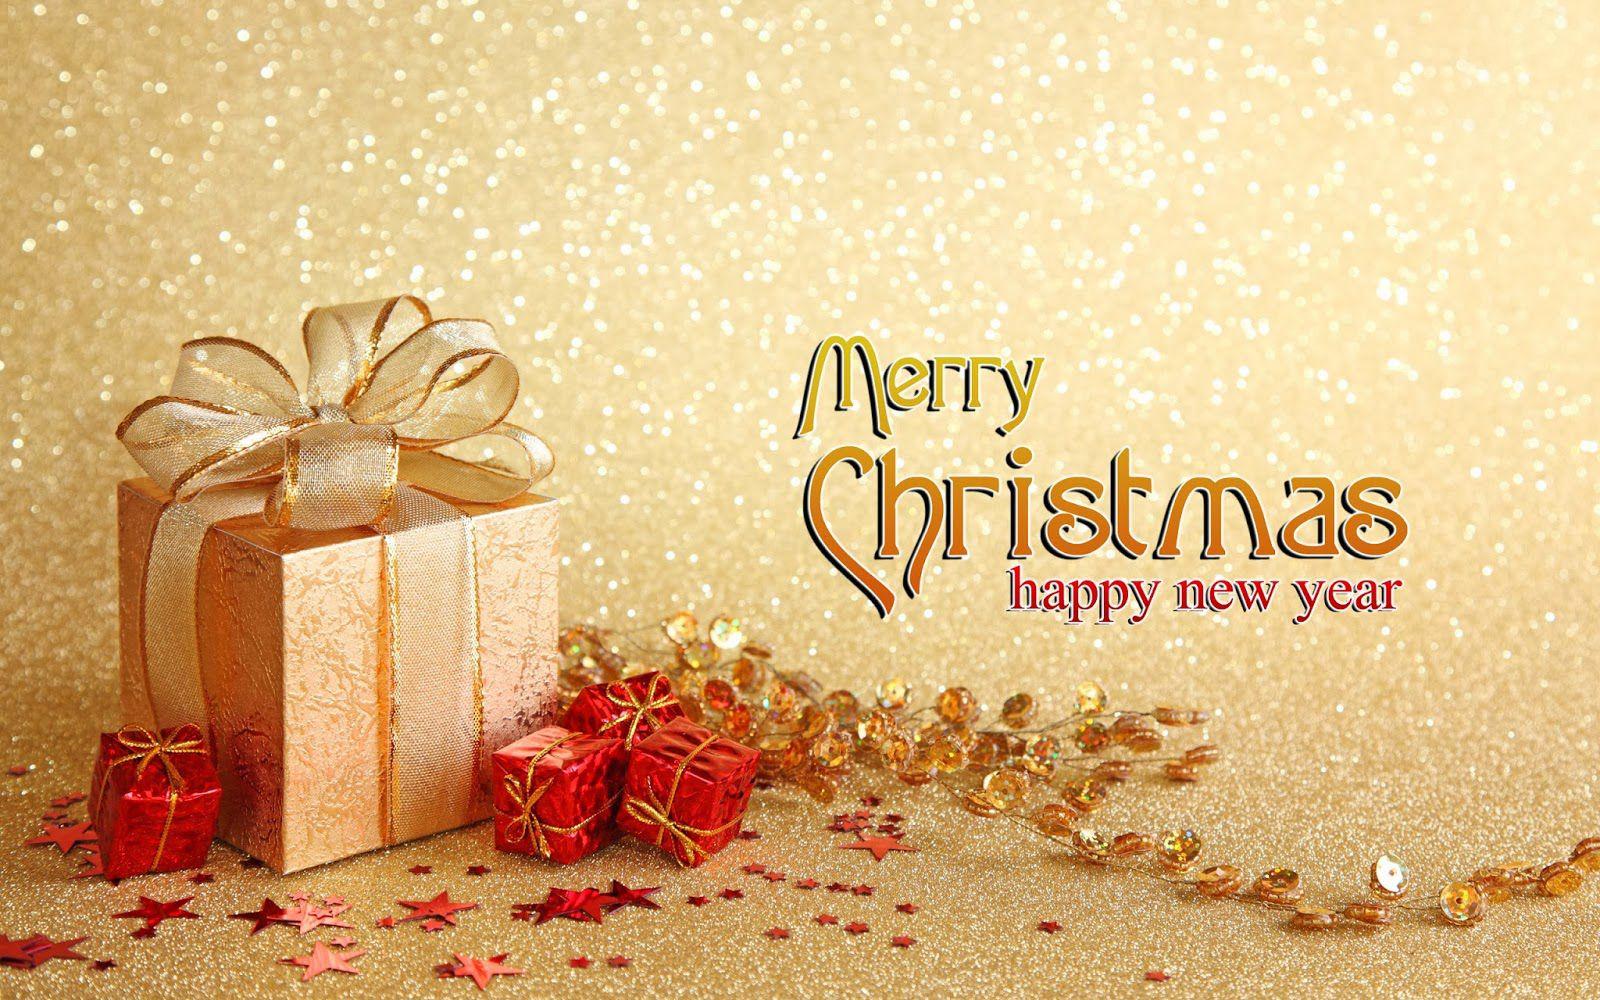 Merry Christmas Wishes, Greetings & Messages, Christmas